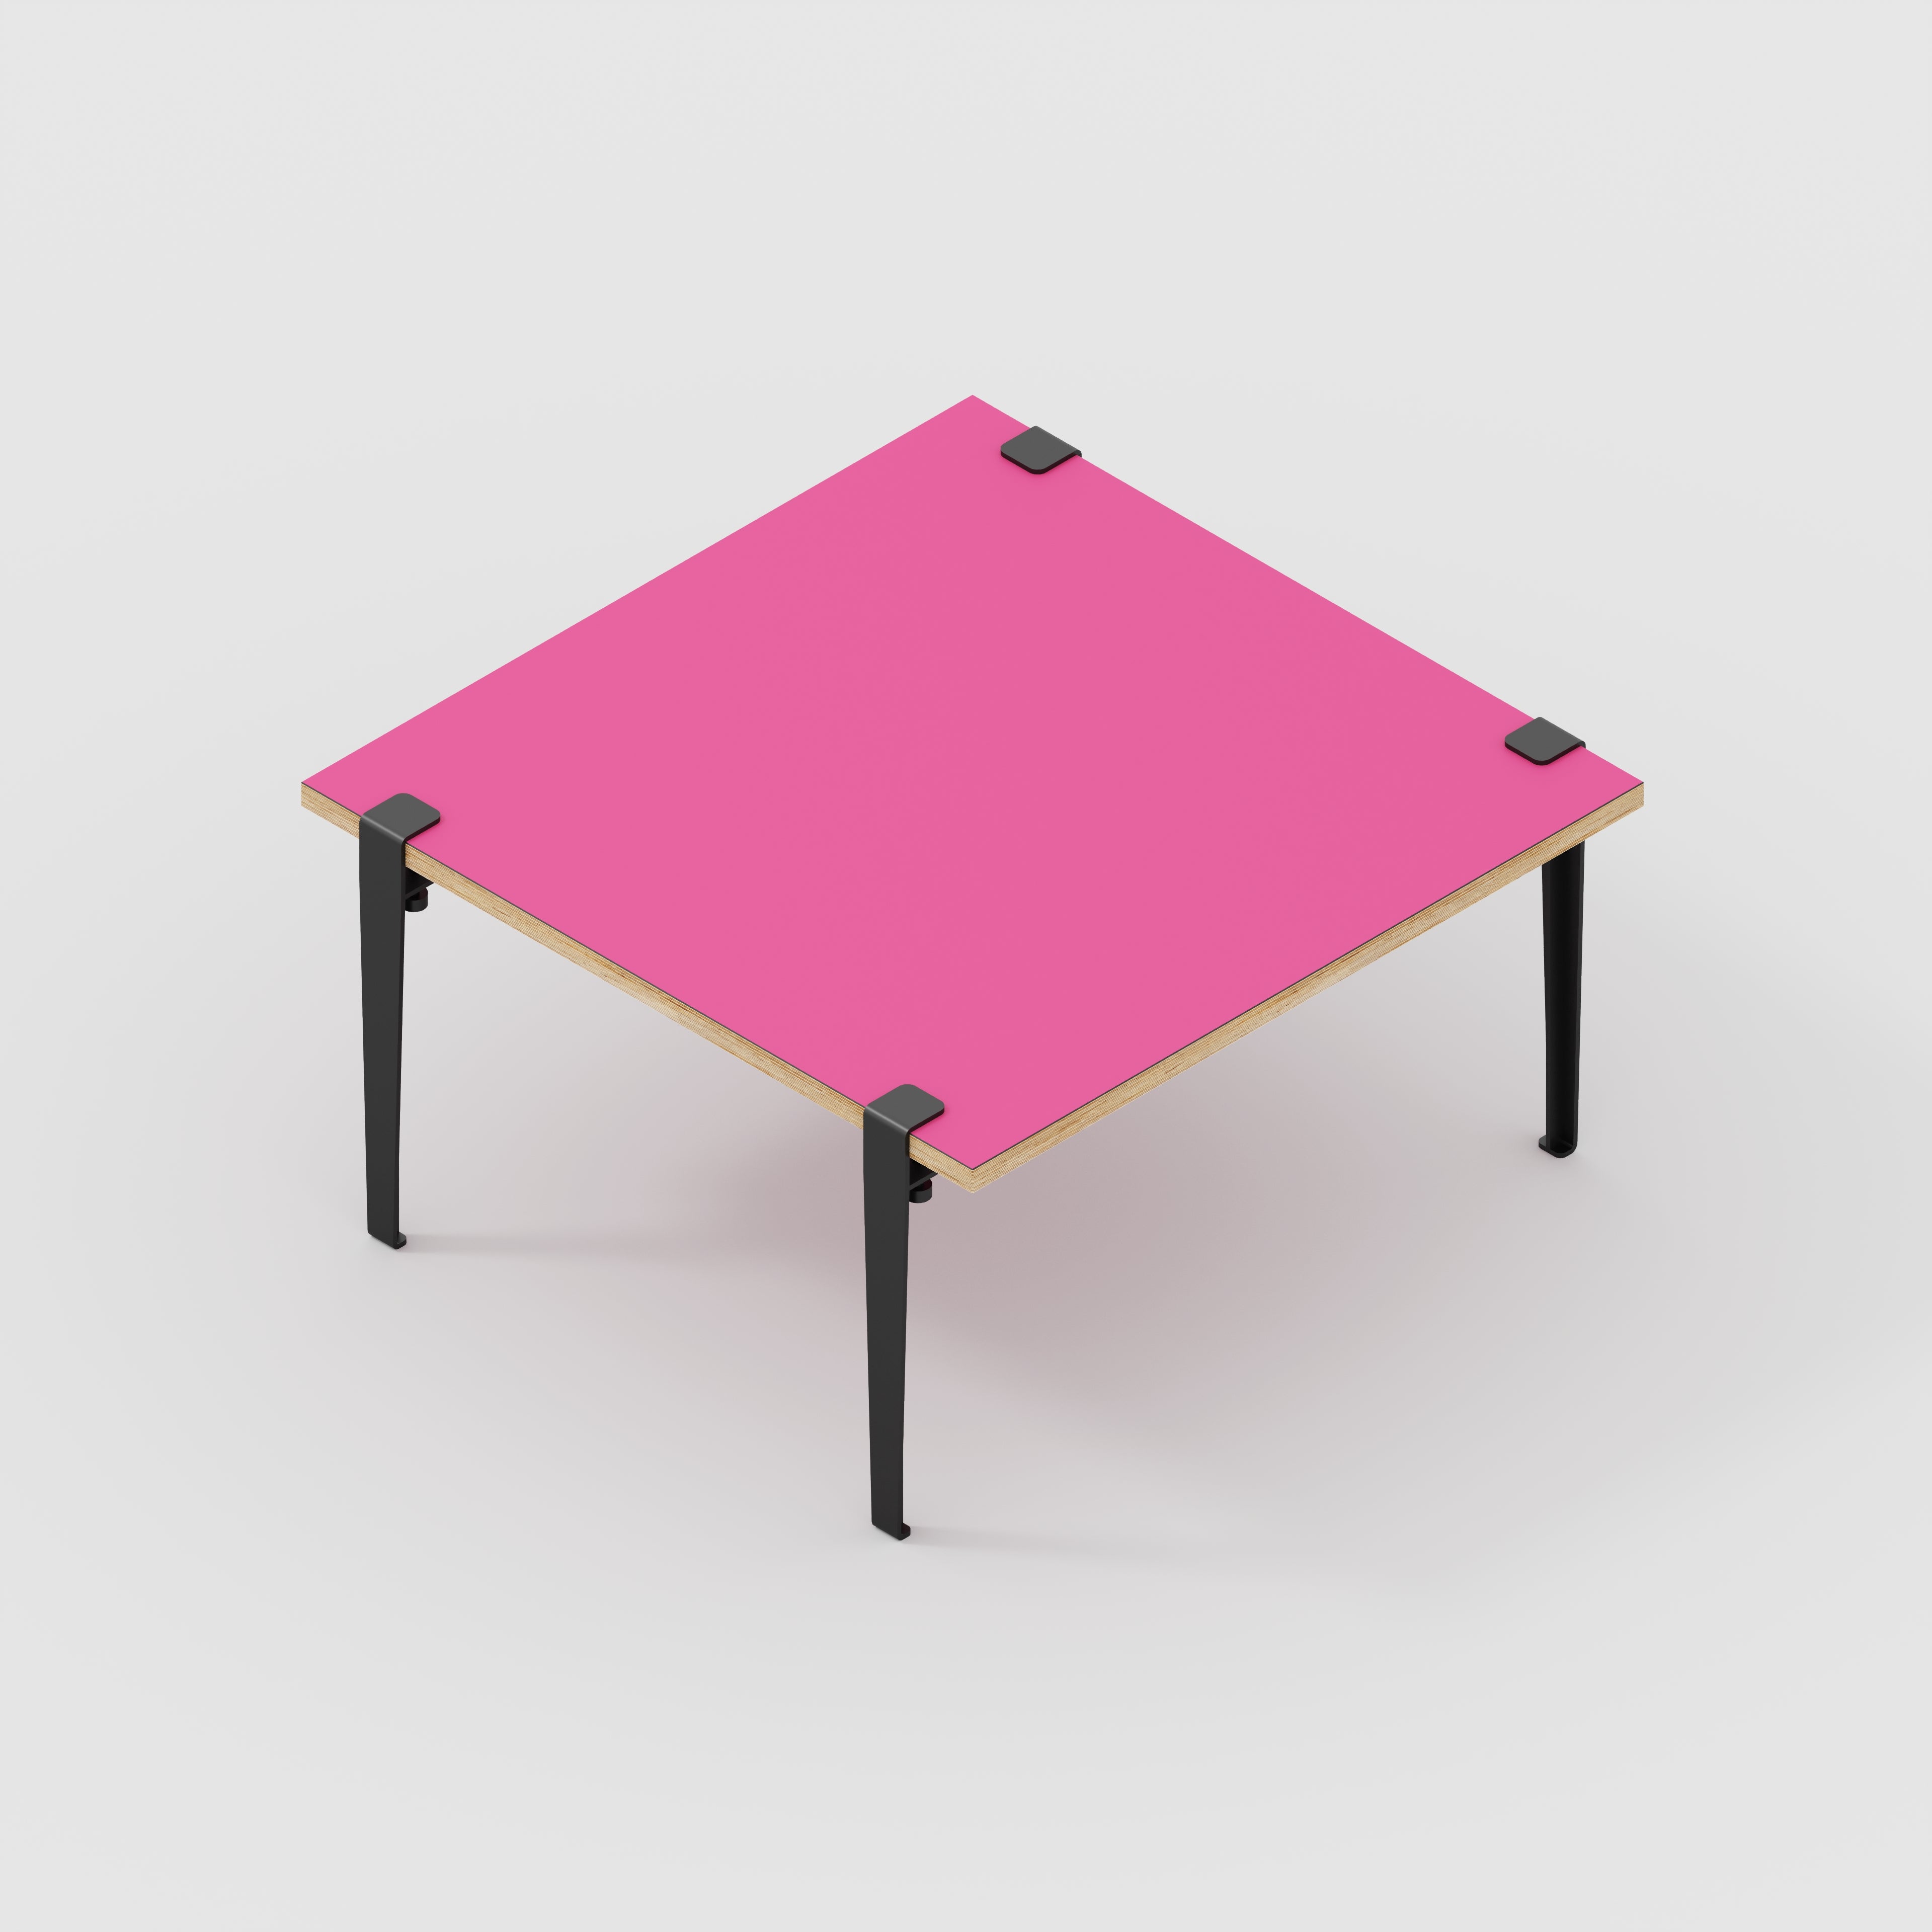 Coffee Table with Black Tiptoe Legs - Formica Juicy Pink - 800(w) x 800(d) x 430(h)